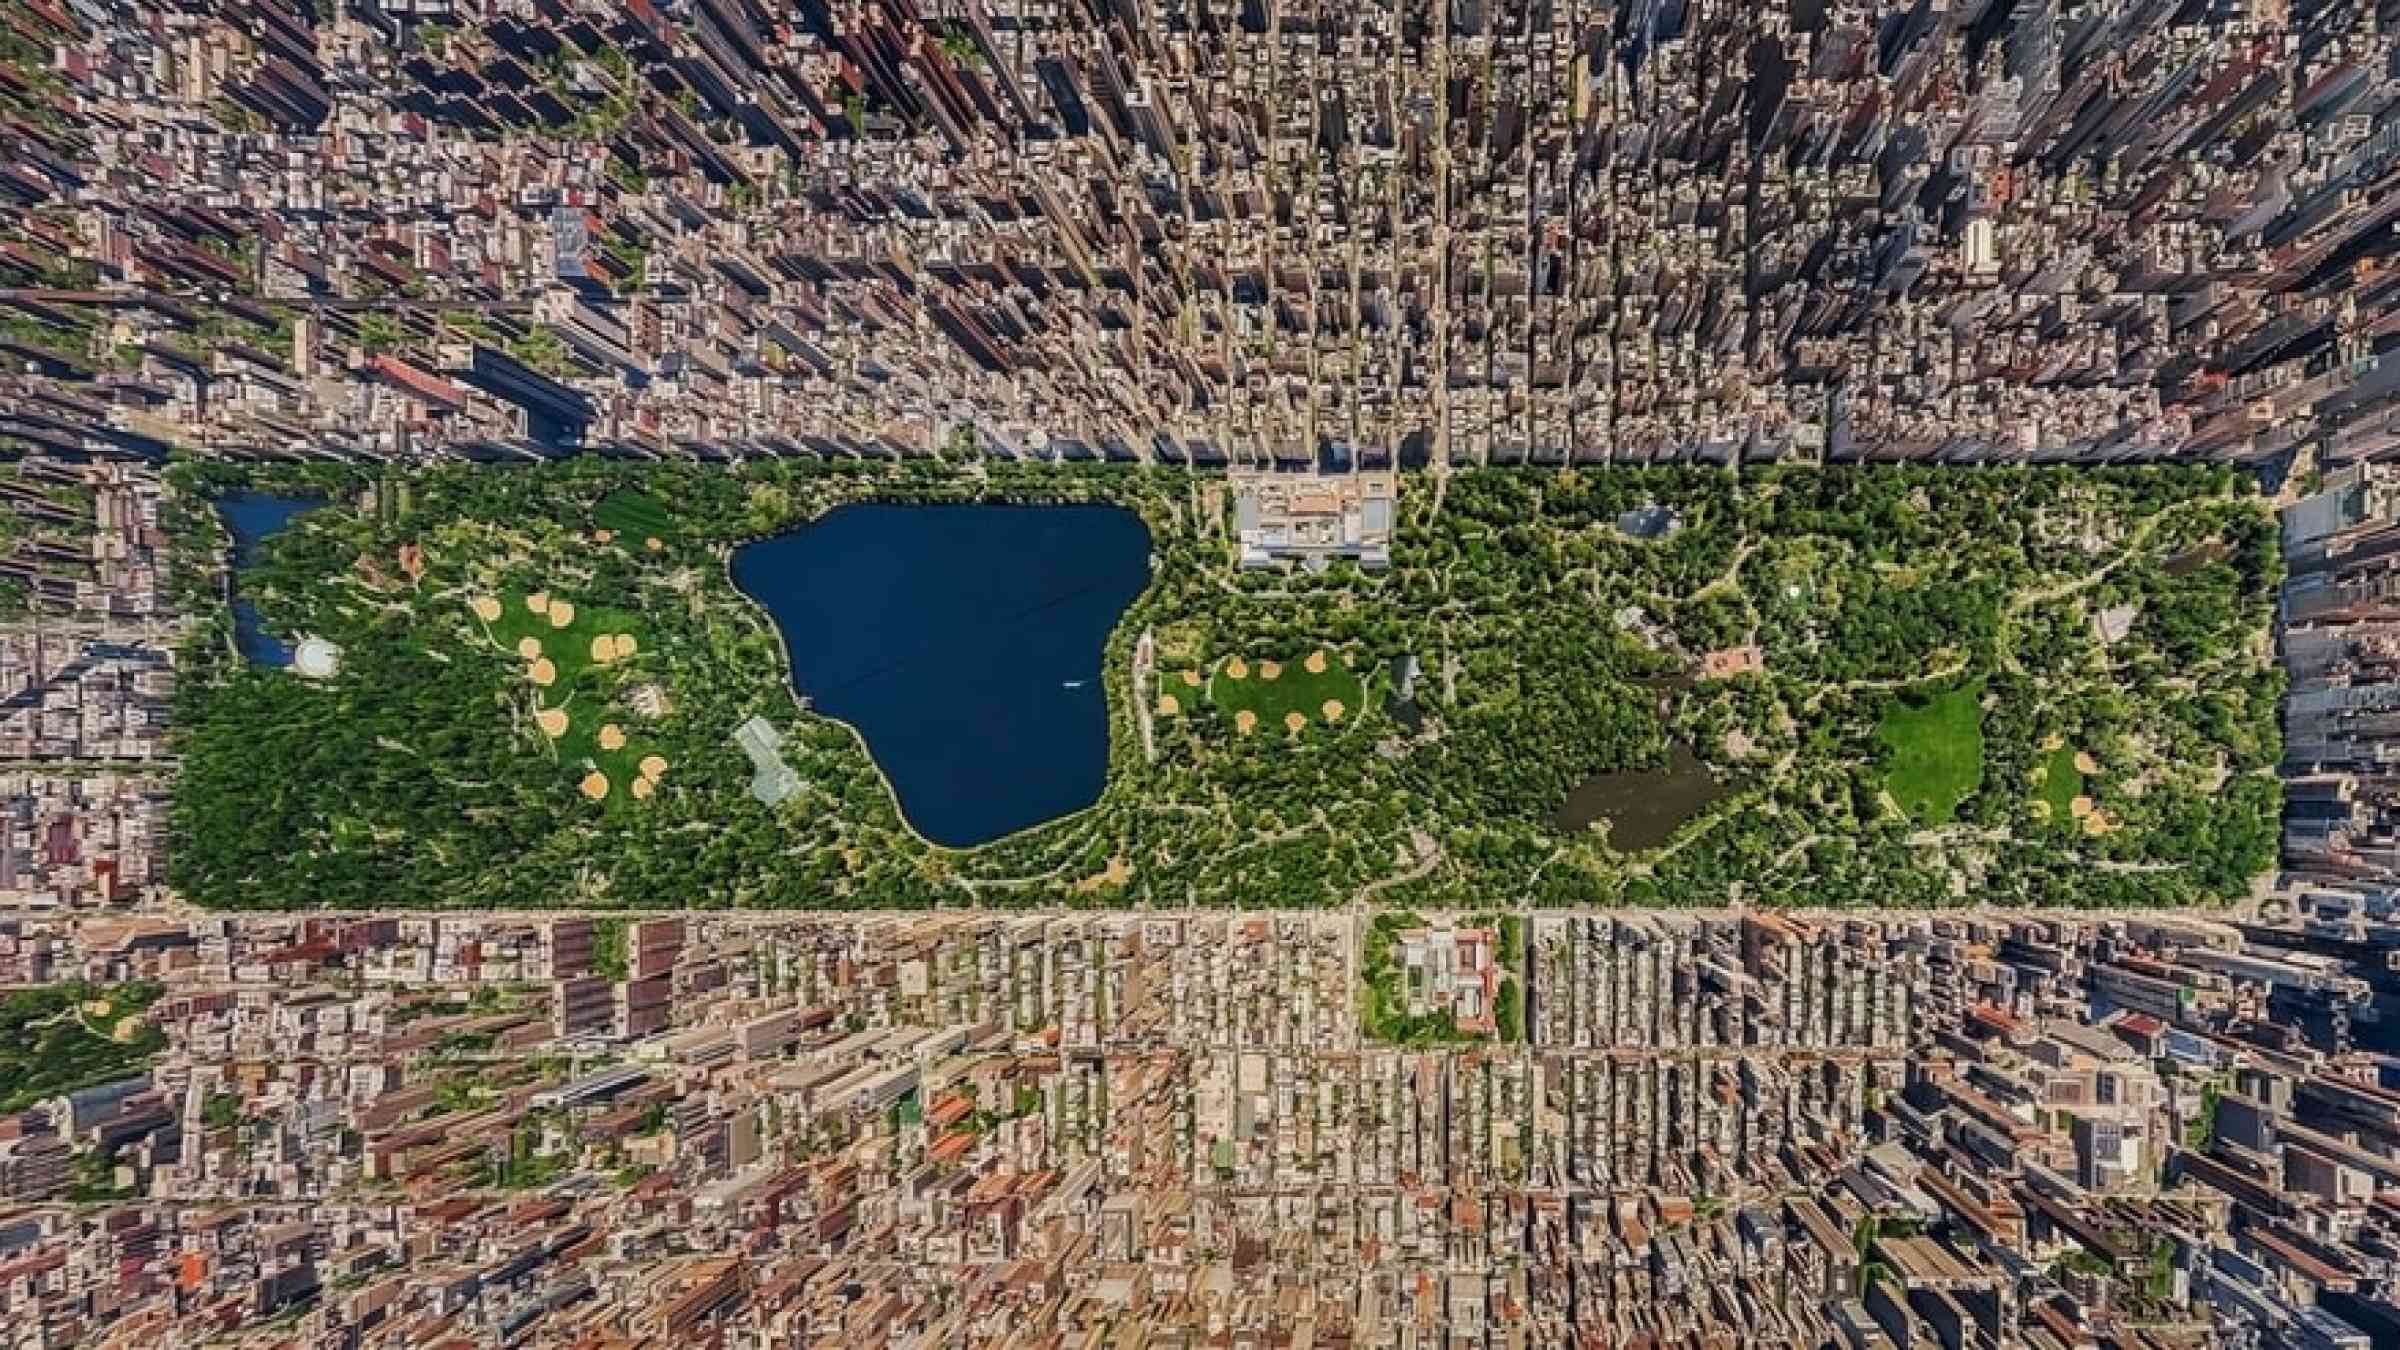 Aerial view of the New York central park and the center of Manhattan.